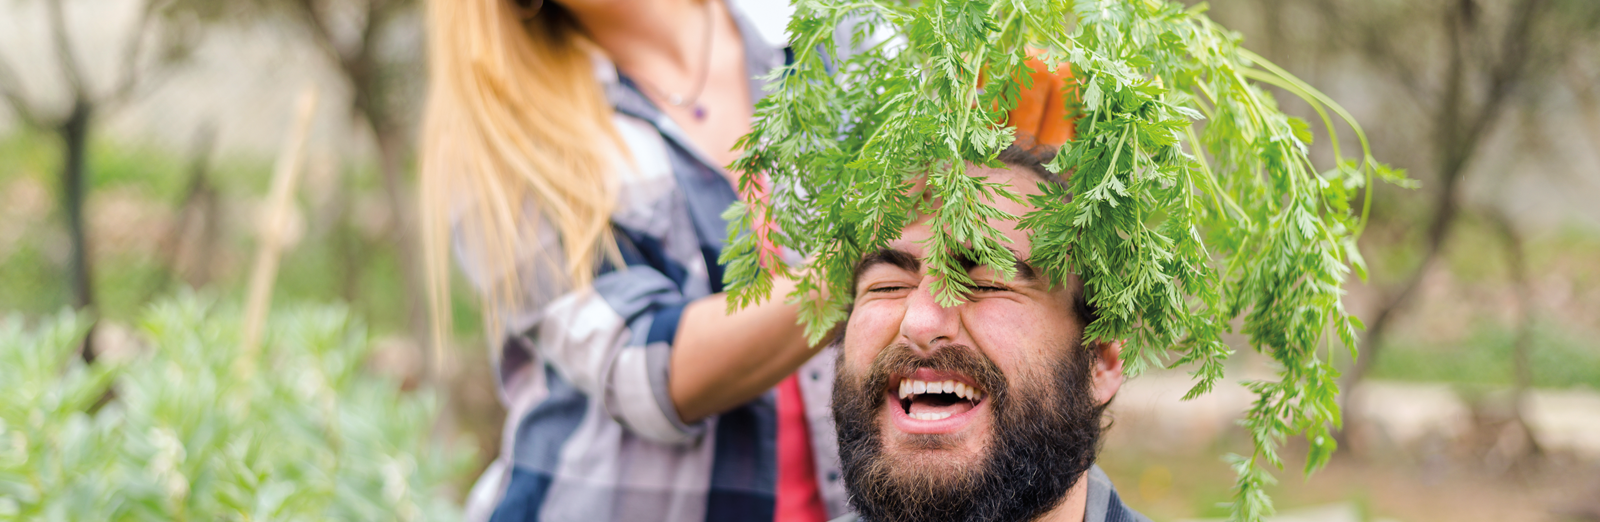 man-with-plant-on-head-1600x522.png